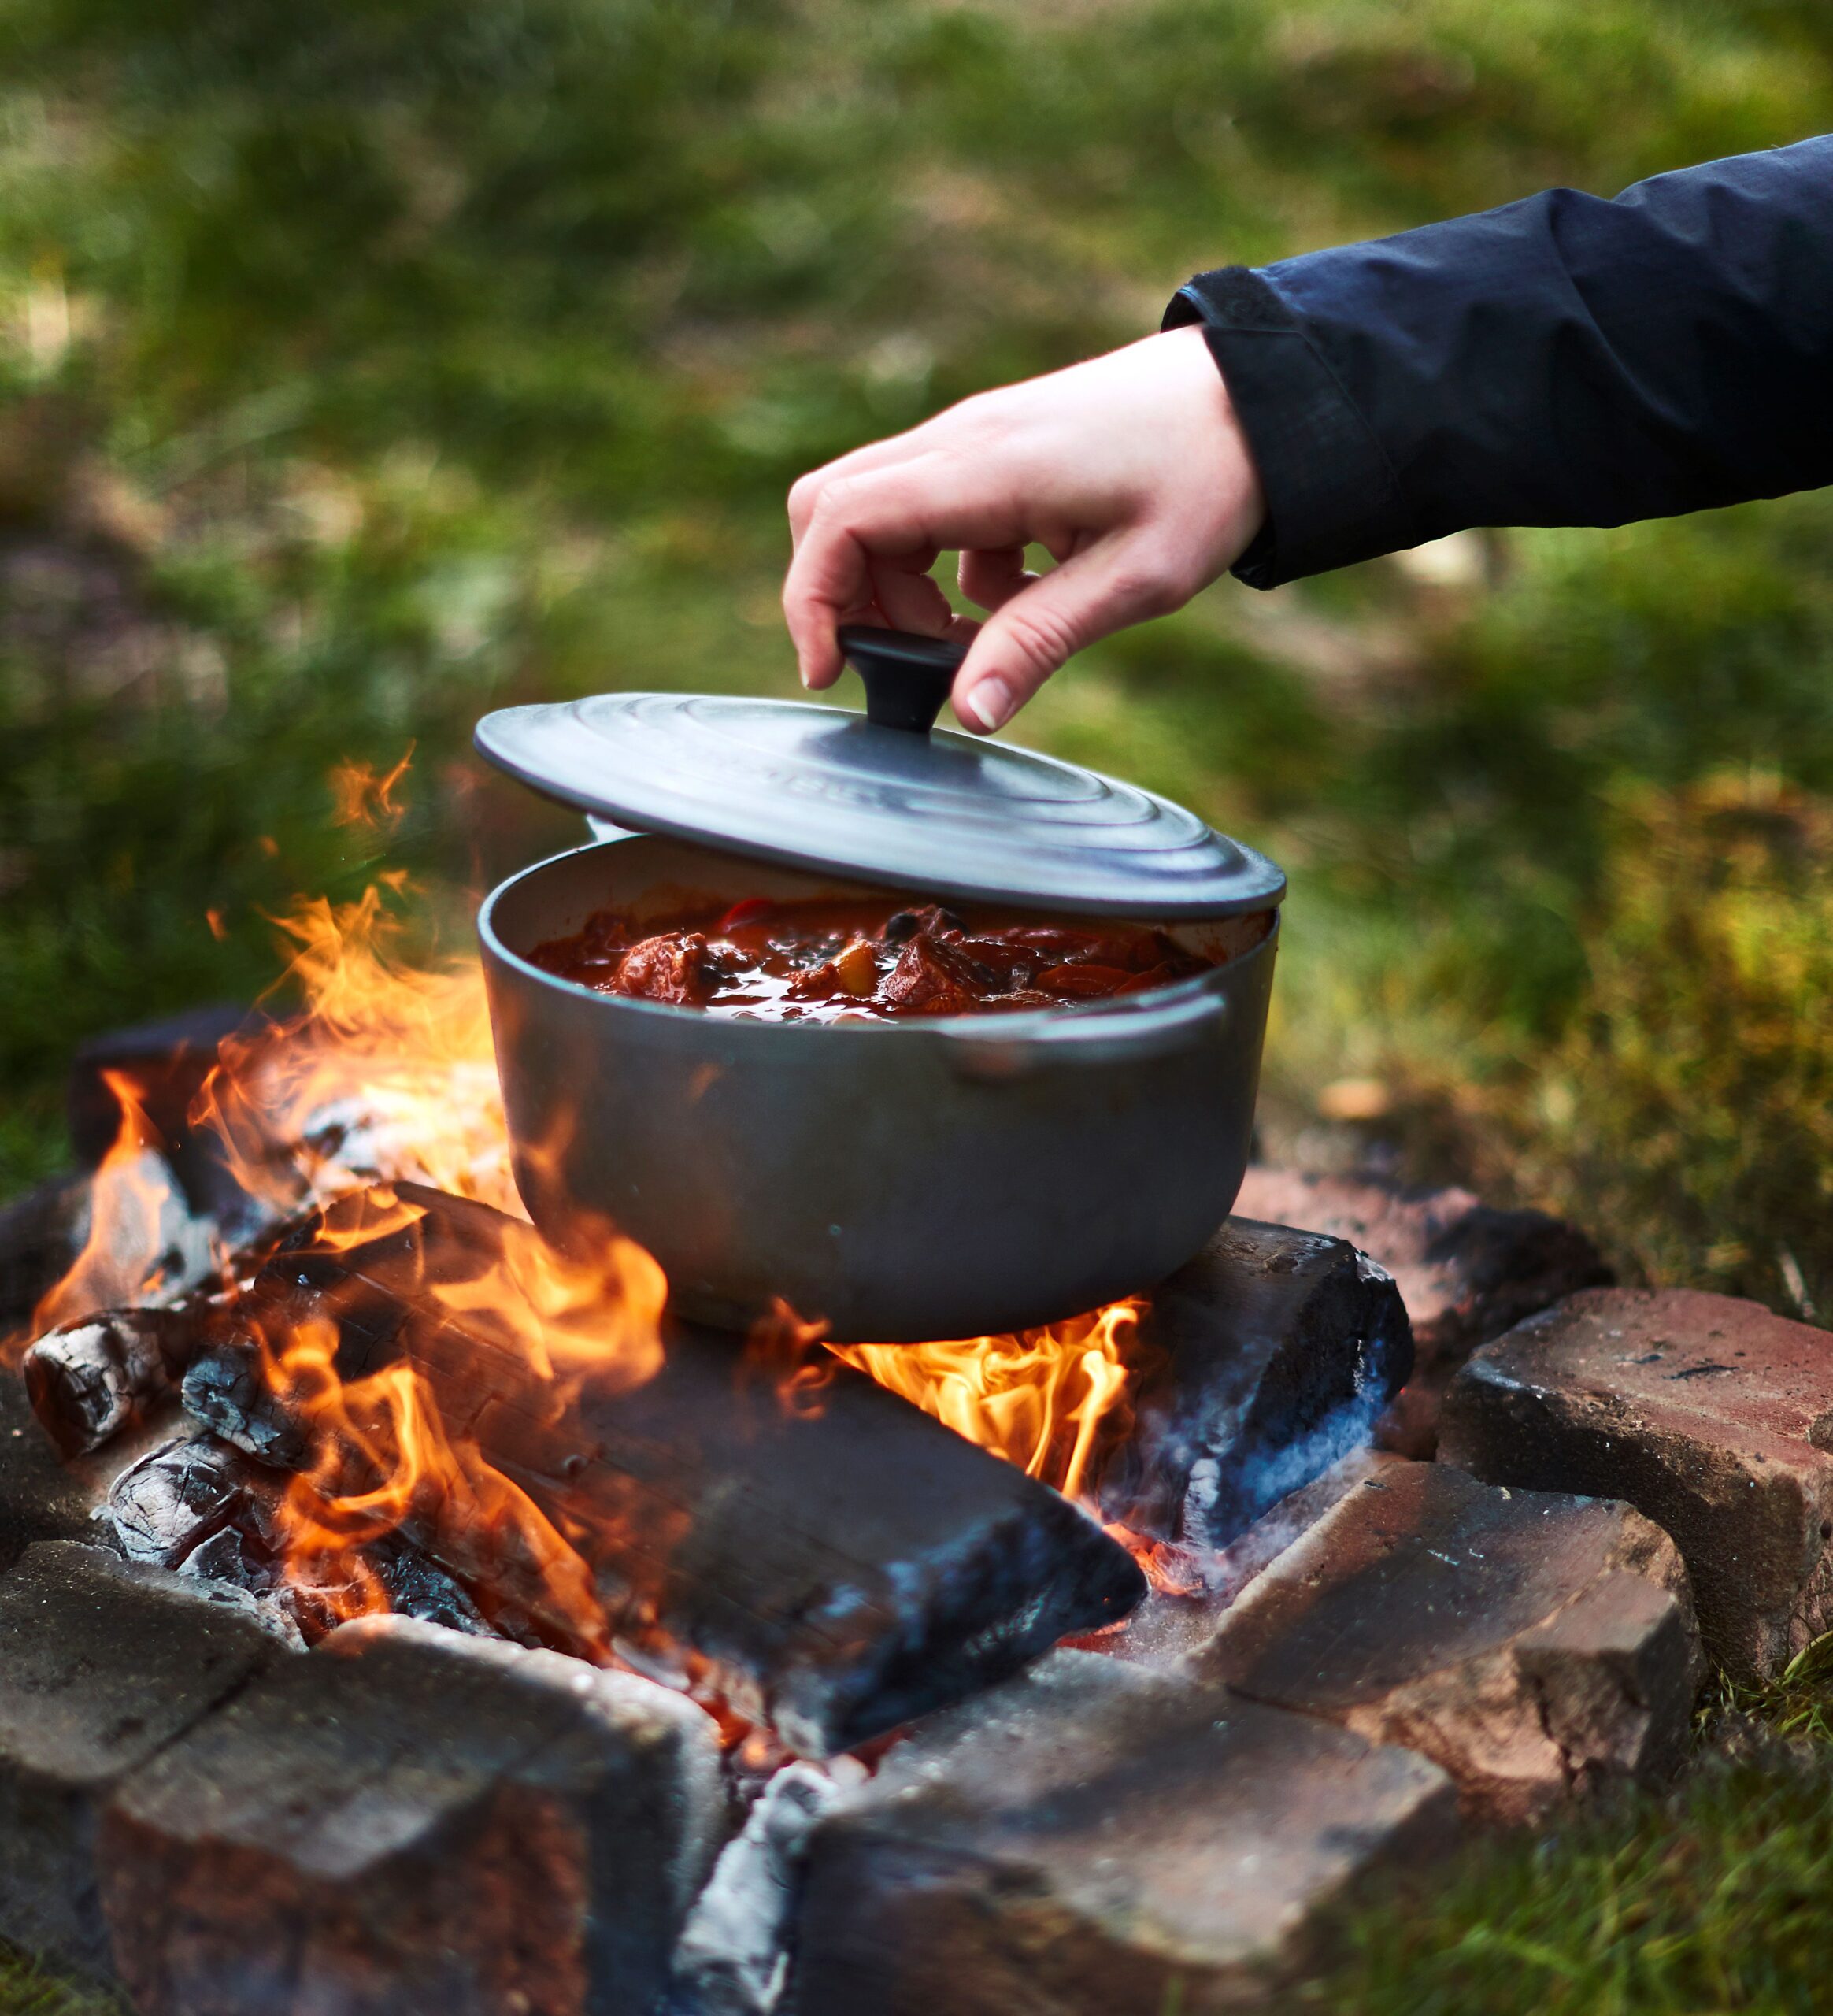 Top camping. Cook over a Campfire. Camping food. The Wild Cooking. People Cooking over Fire.